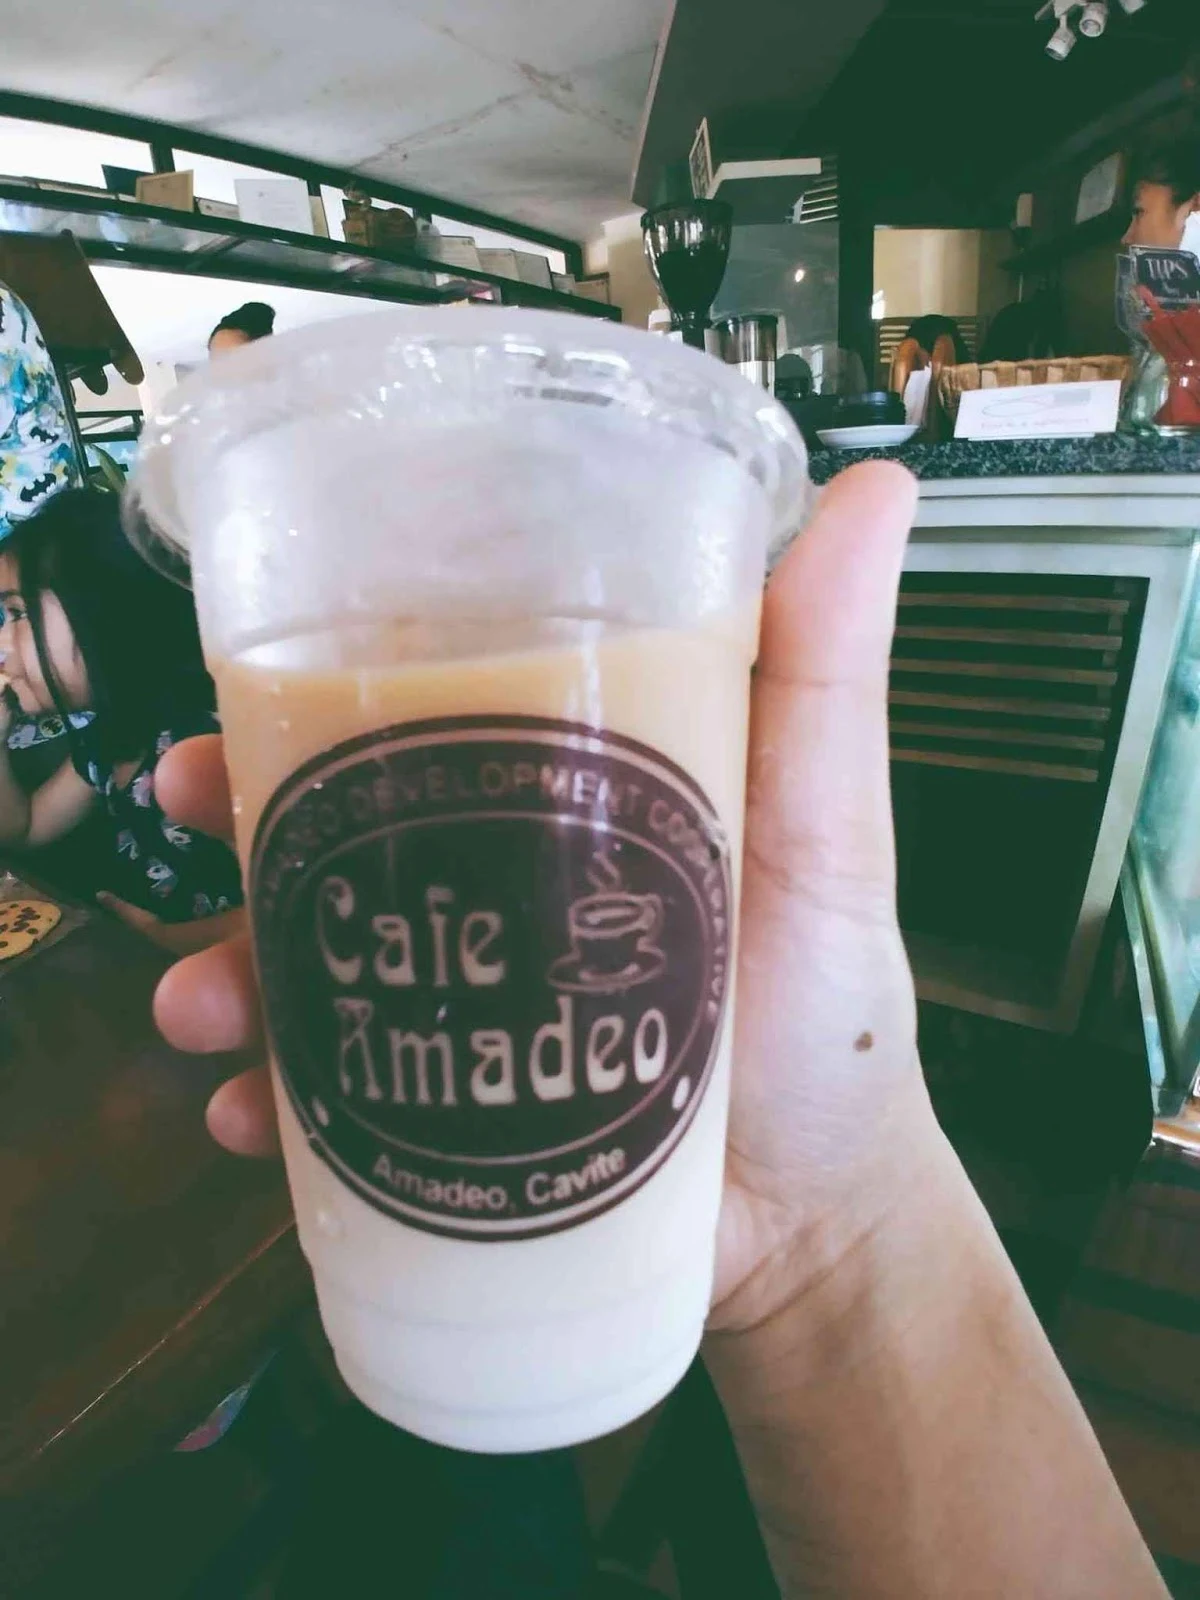 Cafe Amadeo latte coffee